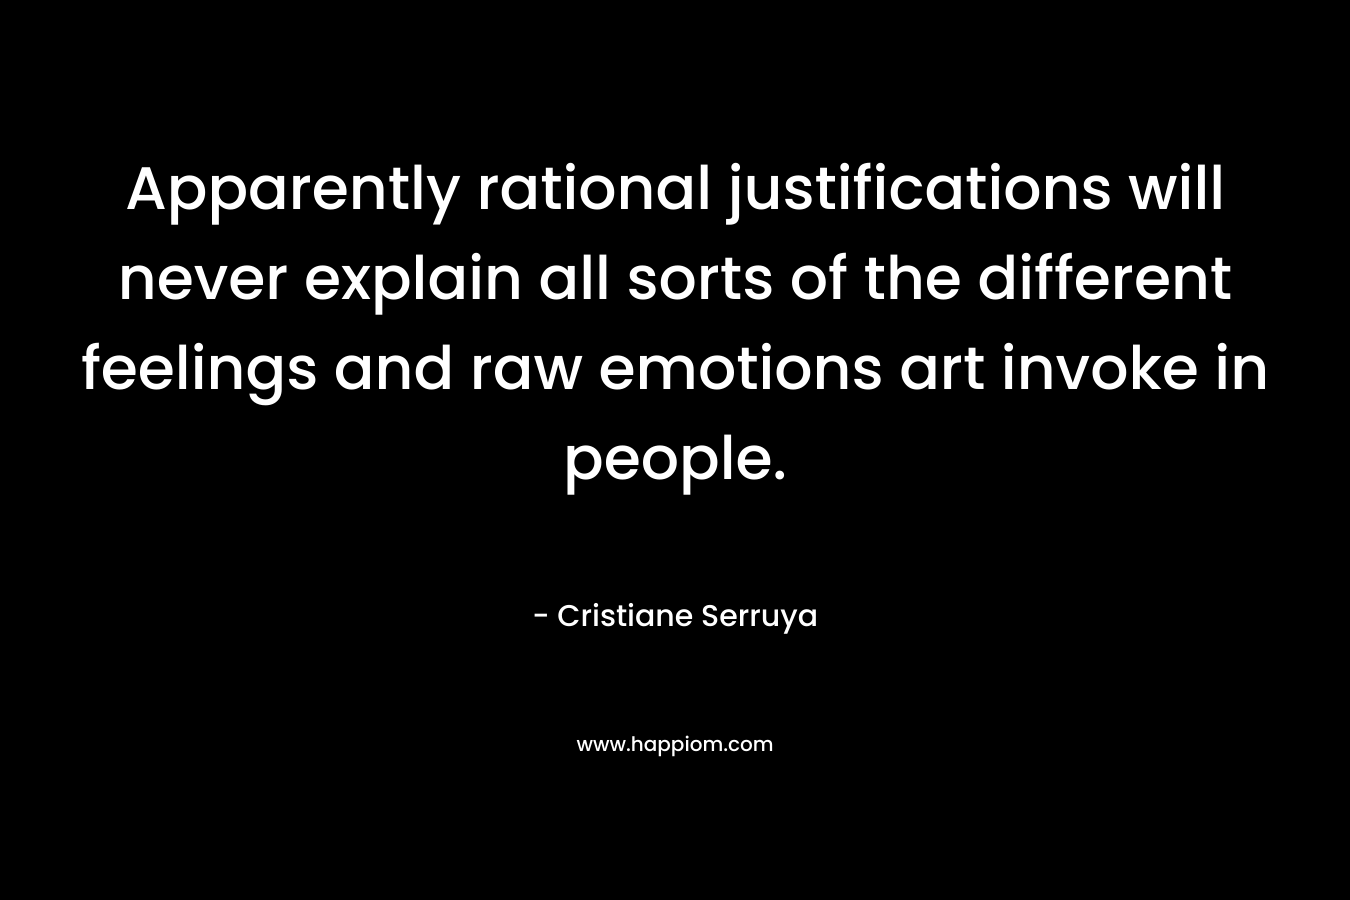 Apparently rational justifications will never explain all sorts of the different feelings and raw emotions art invoke in people. – Cristiane Serruya